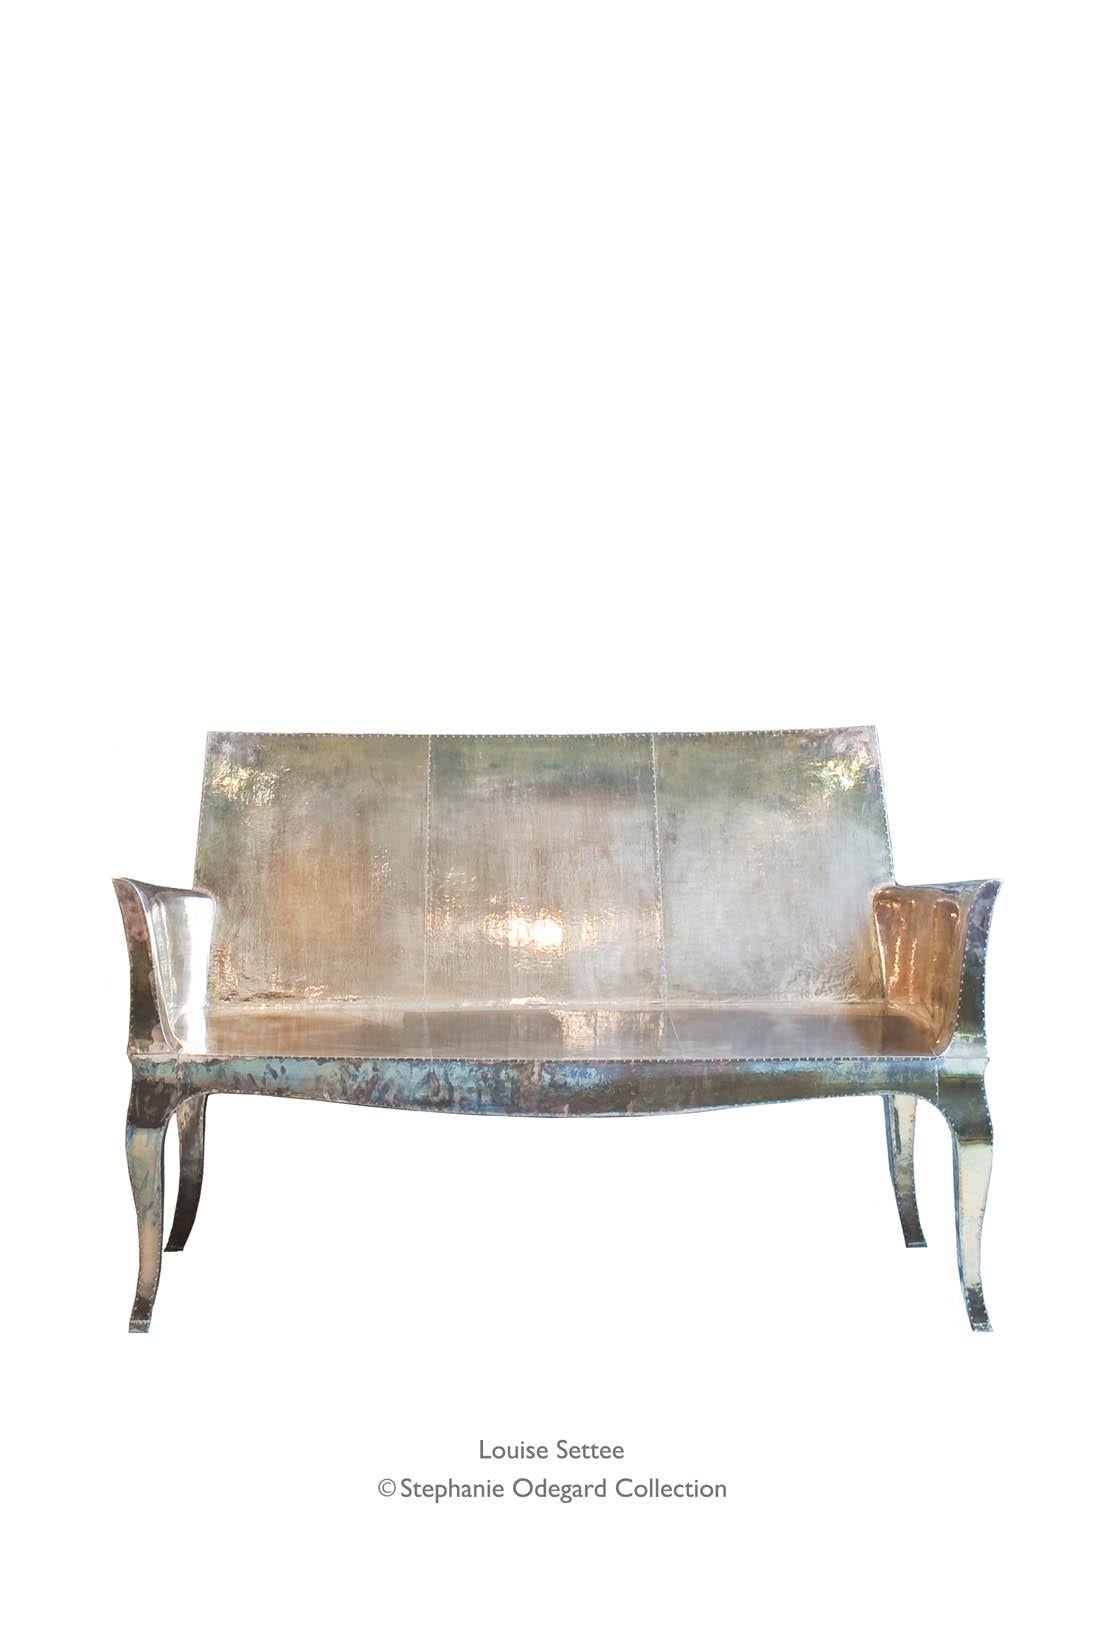 Louise Settee Art Deco Daybeds in Smooth Copper by Paul Mathieu For S Odegard  For Sale 7